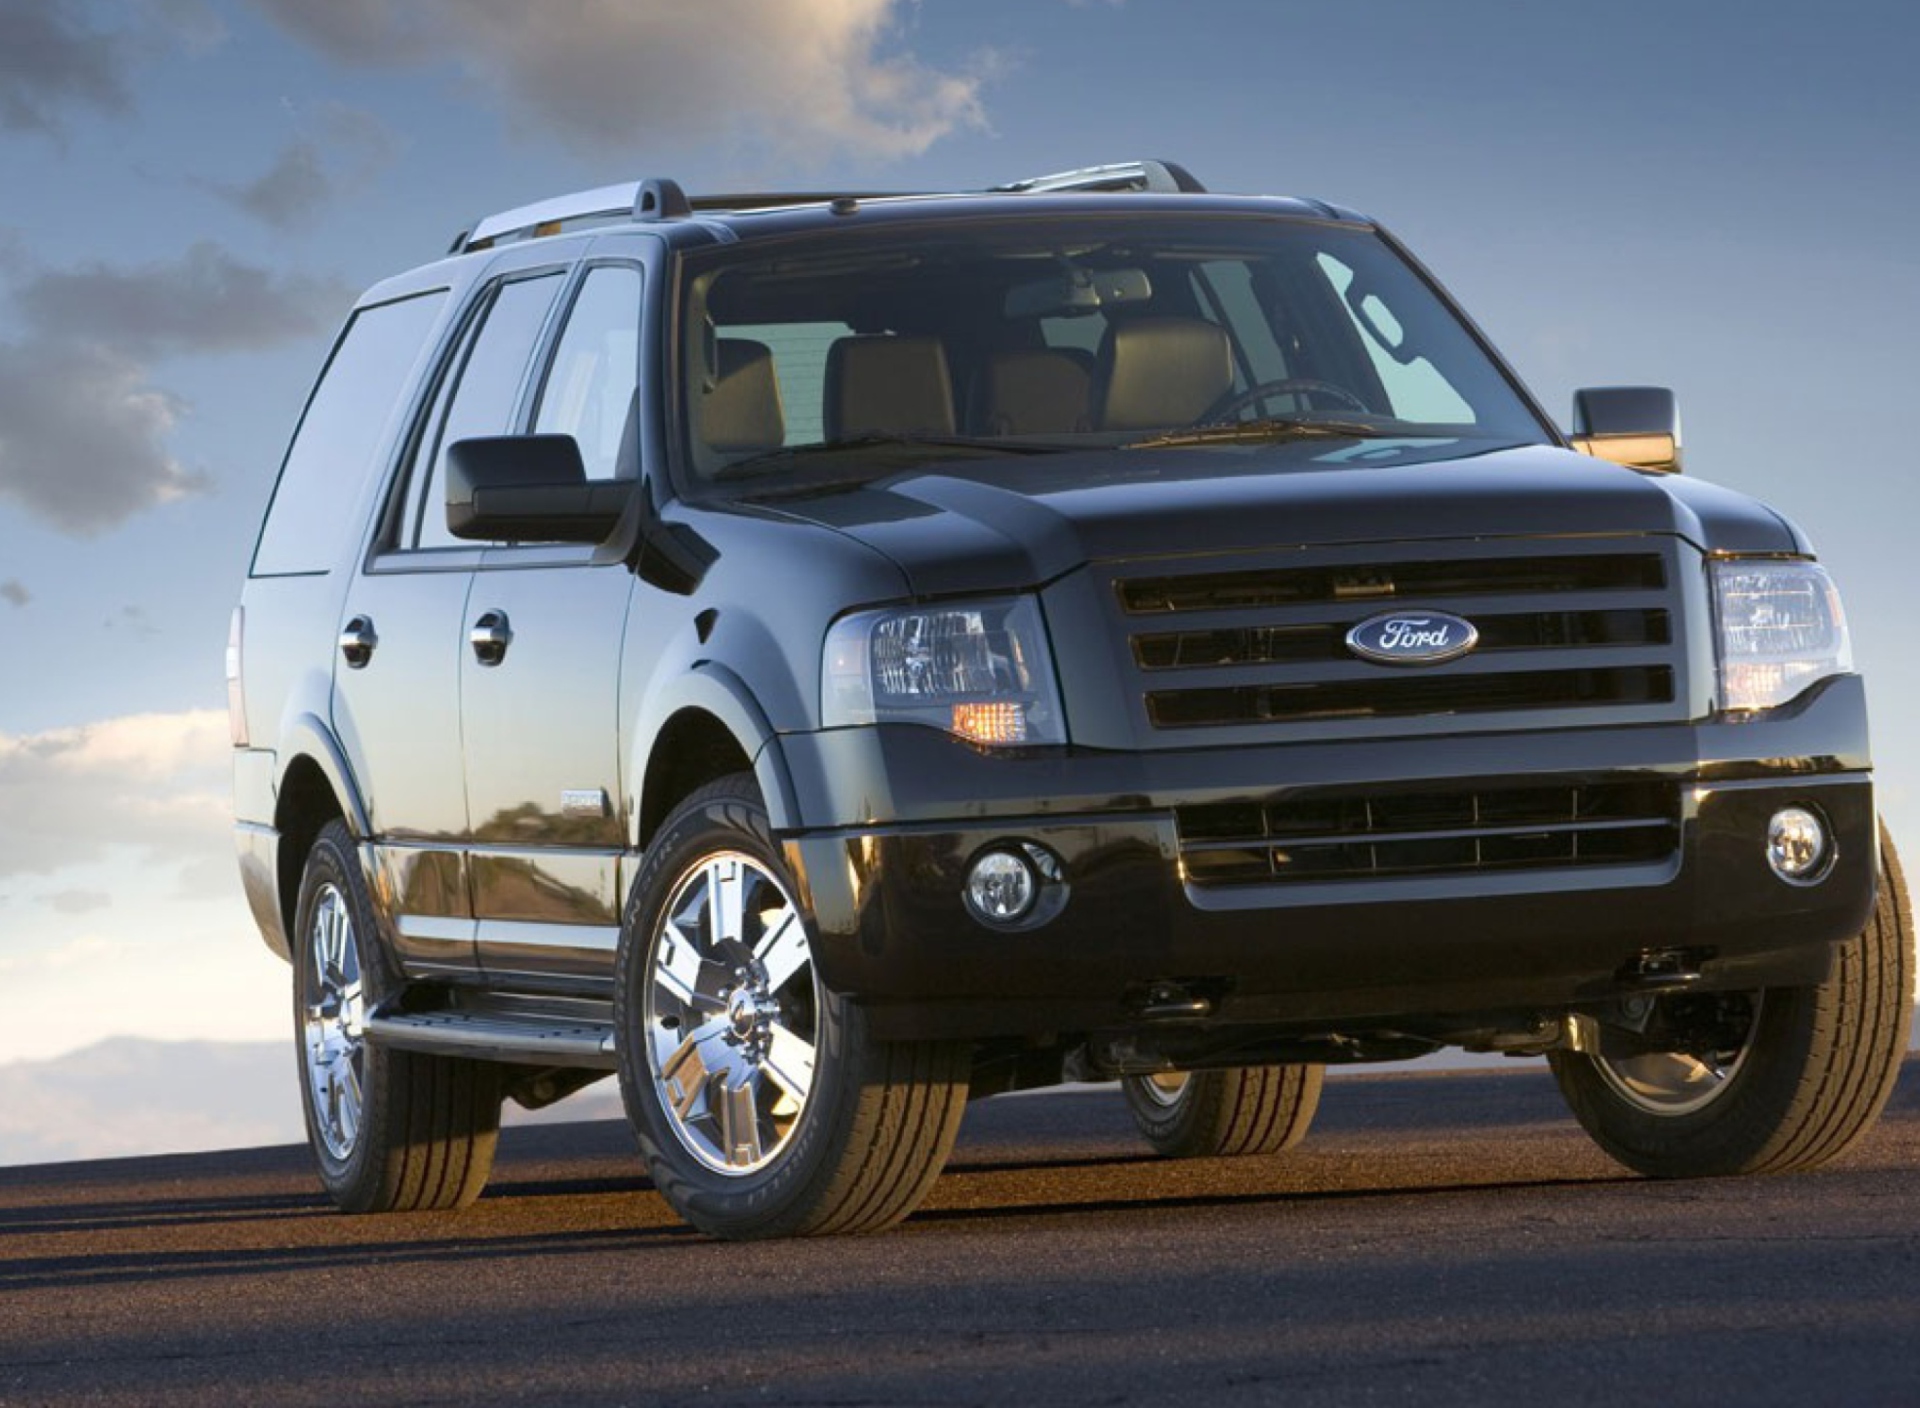 Ford Expedition wallpaper 1920x1408